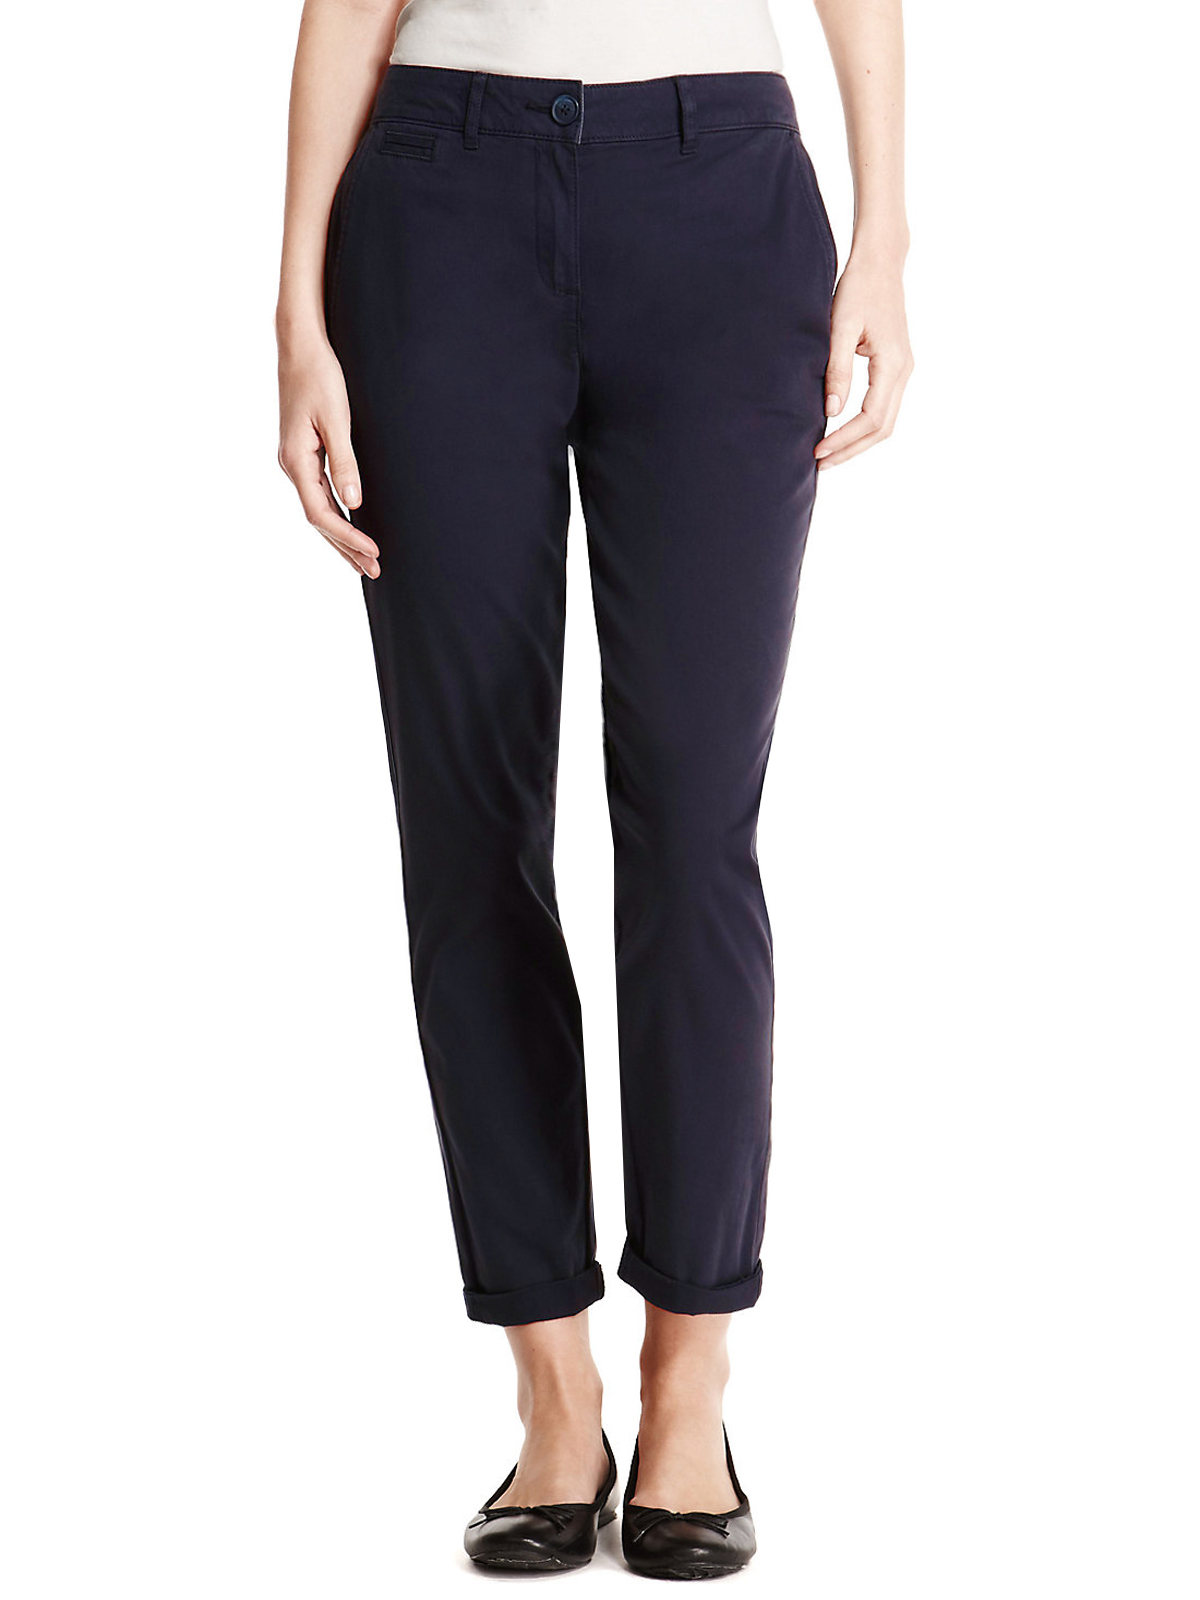 Marks and Spencer - - M&5 NAVY Cotton Rich Straight Leg Chinos - Size ...